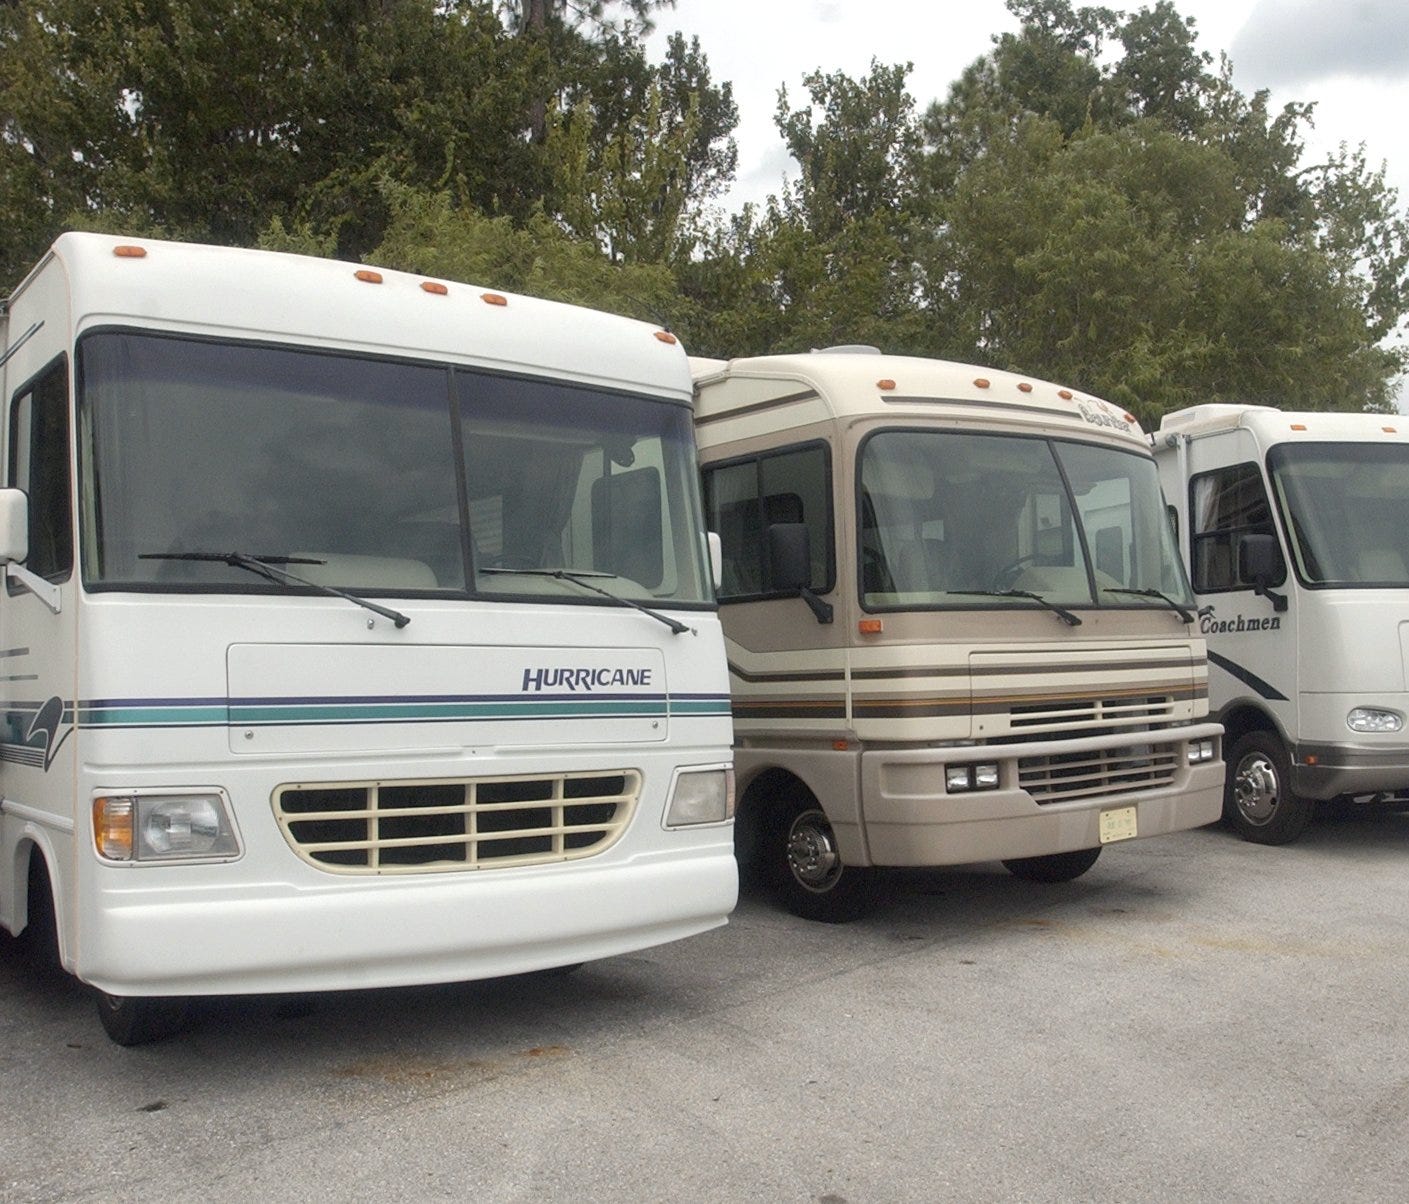 Recreational vehicles are shown at RV World of Lakeland, Fla., Sept. 23, 2003.